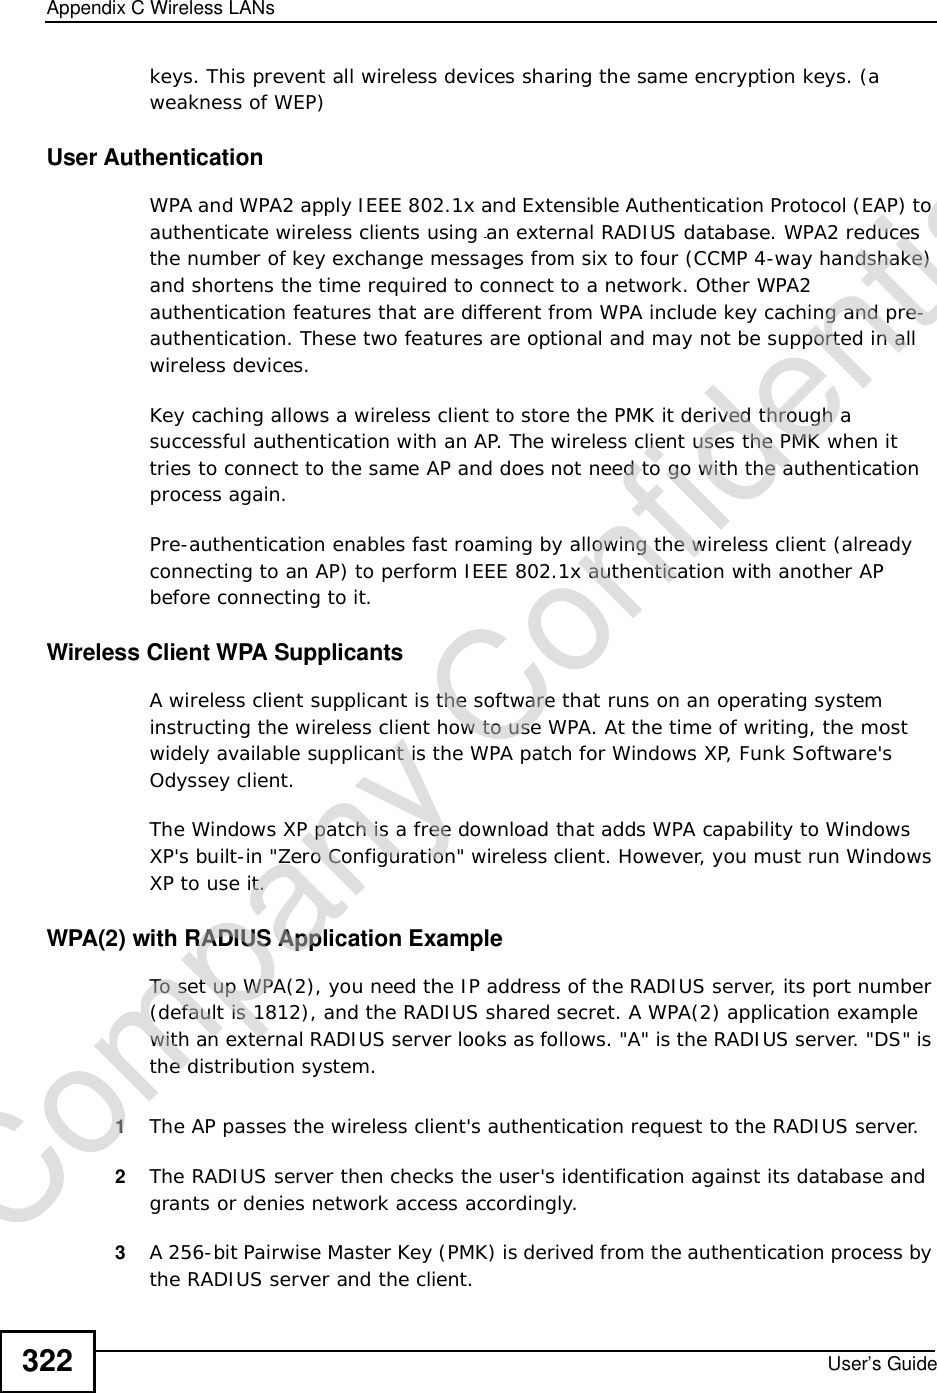 Appendix CWireless LANsUser’s Guide322keys. This prevent all wireless devices sharing the same encryption keys. (a weakness of WEP)User Authentication WPA and WPA2 apply IEEE 802.1x and Extensible Authentication Protocol (EAP) to authenticate wireless clients using an external RADIUS database. WPA2 reduces the number of key exchange messages from six to four (CCMP 4-way handshake) and shortens the time required to connect to a network. Other WPA2 authentication features that are different from WPA include key caching and pre-authentication. These two features are optional and may not be supported in all wireless devices.Key caching allows a wireless client to store the PMK it derived through a successful authentication with an AP. The wireless client uses the PMK when it tries to connect to the same AP and does not need to go with the authentication process again.Pre-authentication enables fast roaming by allowing the wireless client (already connecting to an AP) to perform IEEE 802.1x authentication with another AP before connecting to it.Wireless Client WPA SupplicantsA wireless client supplicant is the software that runs on an operating system instructing the wireless client how to use WPA. At the time of writing, the most widely available supplicant is theWPA patch for Windows XP, Funk Software&apos;s Odyssey client. The Windows XP patch is a free download that adds WPA capability to Windows XP&apos;s built-in &quot;Zero Configuration&quot; wireless client. However, you must run Windows XP to use it. WPA(2) with RADIUS Application ExampleTo set up WPA(2), you need the IP address of the RADIUS server, its port number (default is 1812), and the RADIUS shared secret. A WPA(2) application example with an external RADIUS server looks as follows. &quot;A&quot; is the RADIUS server. &quot;DS&quot; is the distribution system.1The AP passes the wireless client&apos;s authentication request to the RADIUS server.2The RADIUS server then checks the user&apos;s identification against its database and grants or denies network access accordingly.3A 256-bit Pairwise Master Key (PMK) is derived from the authentication process by the RADIUS server and the client.Company Confidential